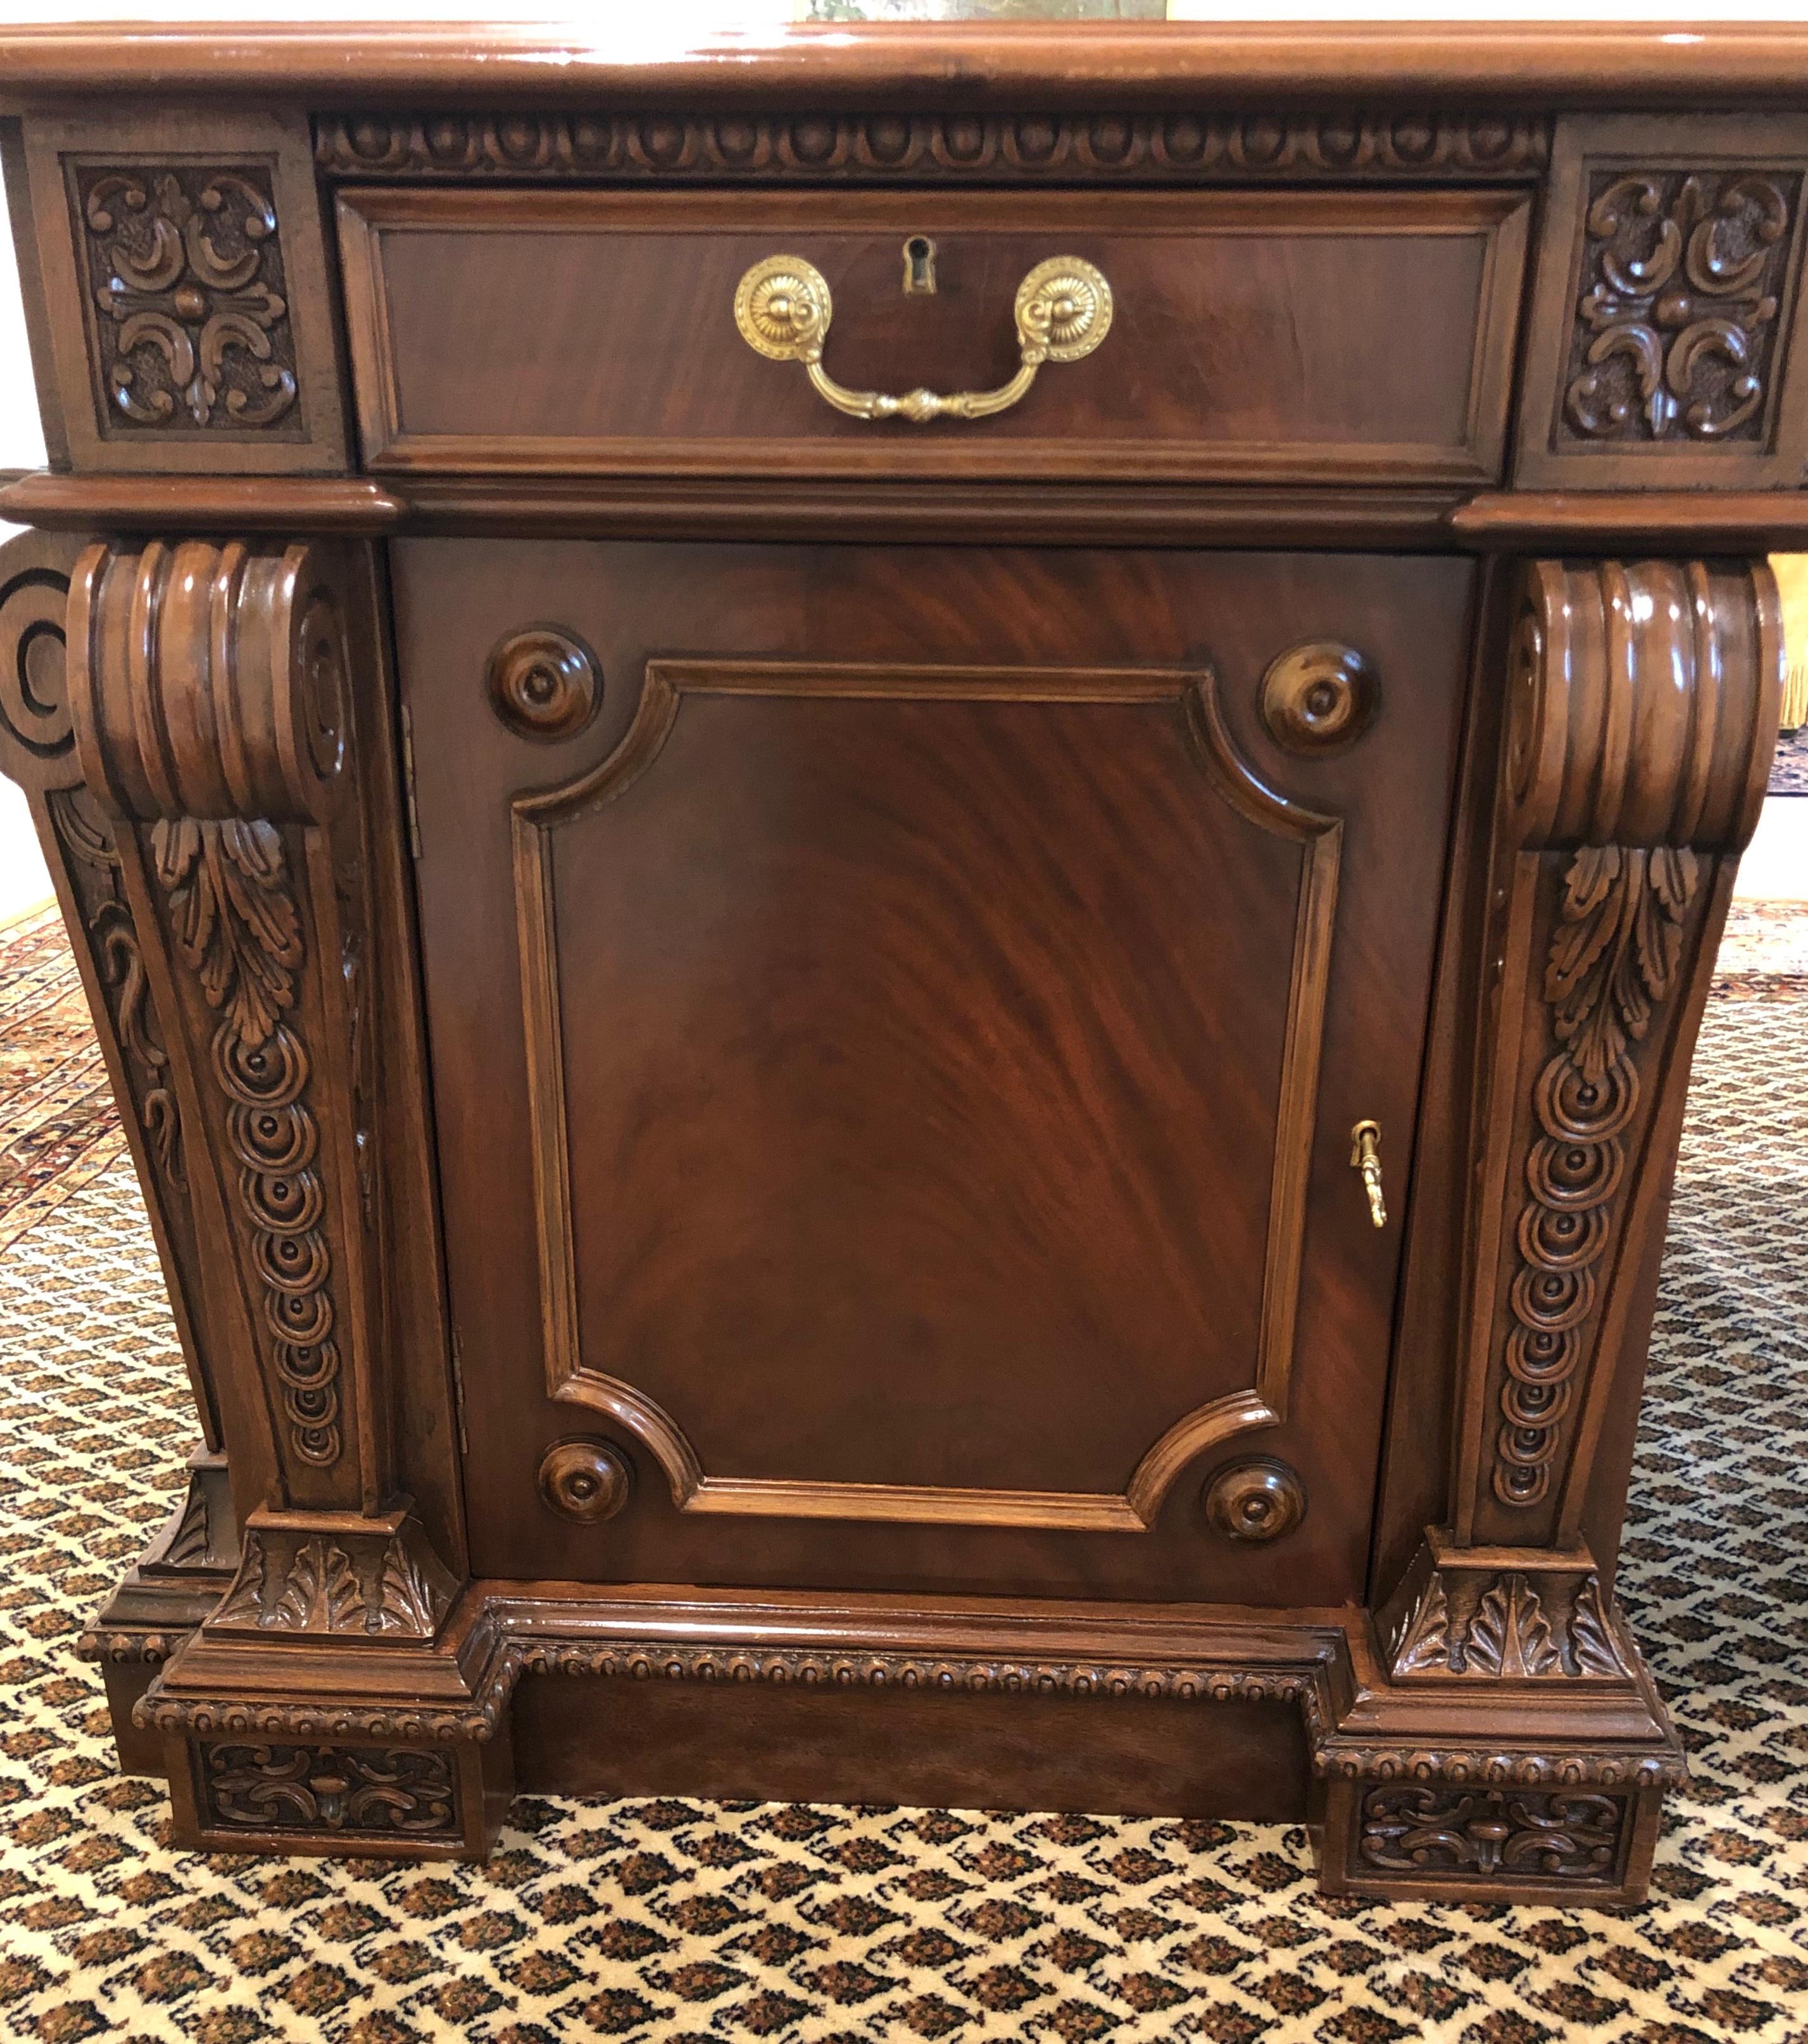 Regency Mahogany Twin Pedestal Desk with Gold Tooled Leather Top 1